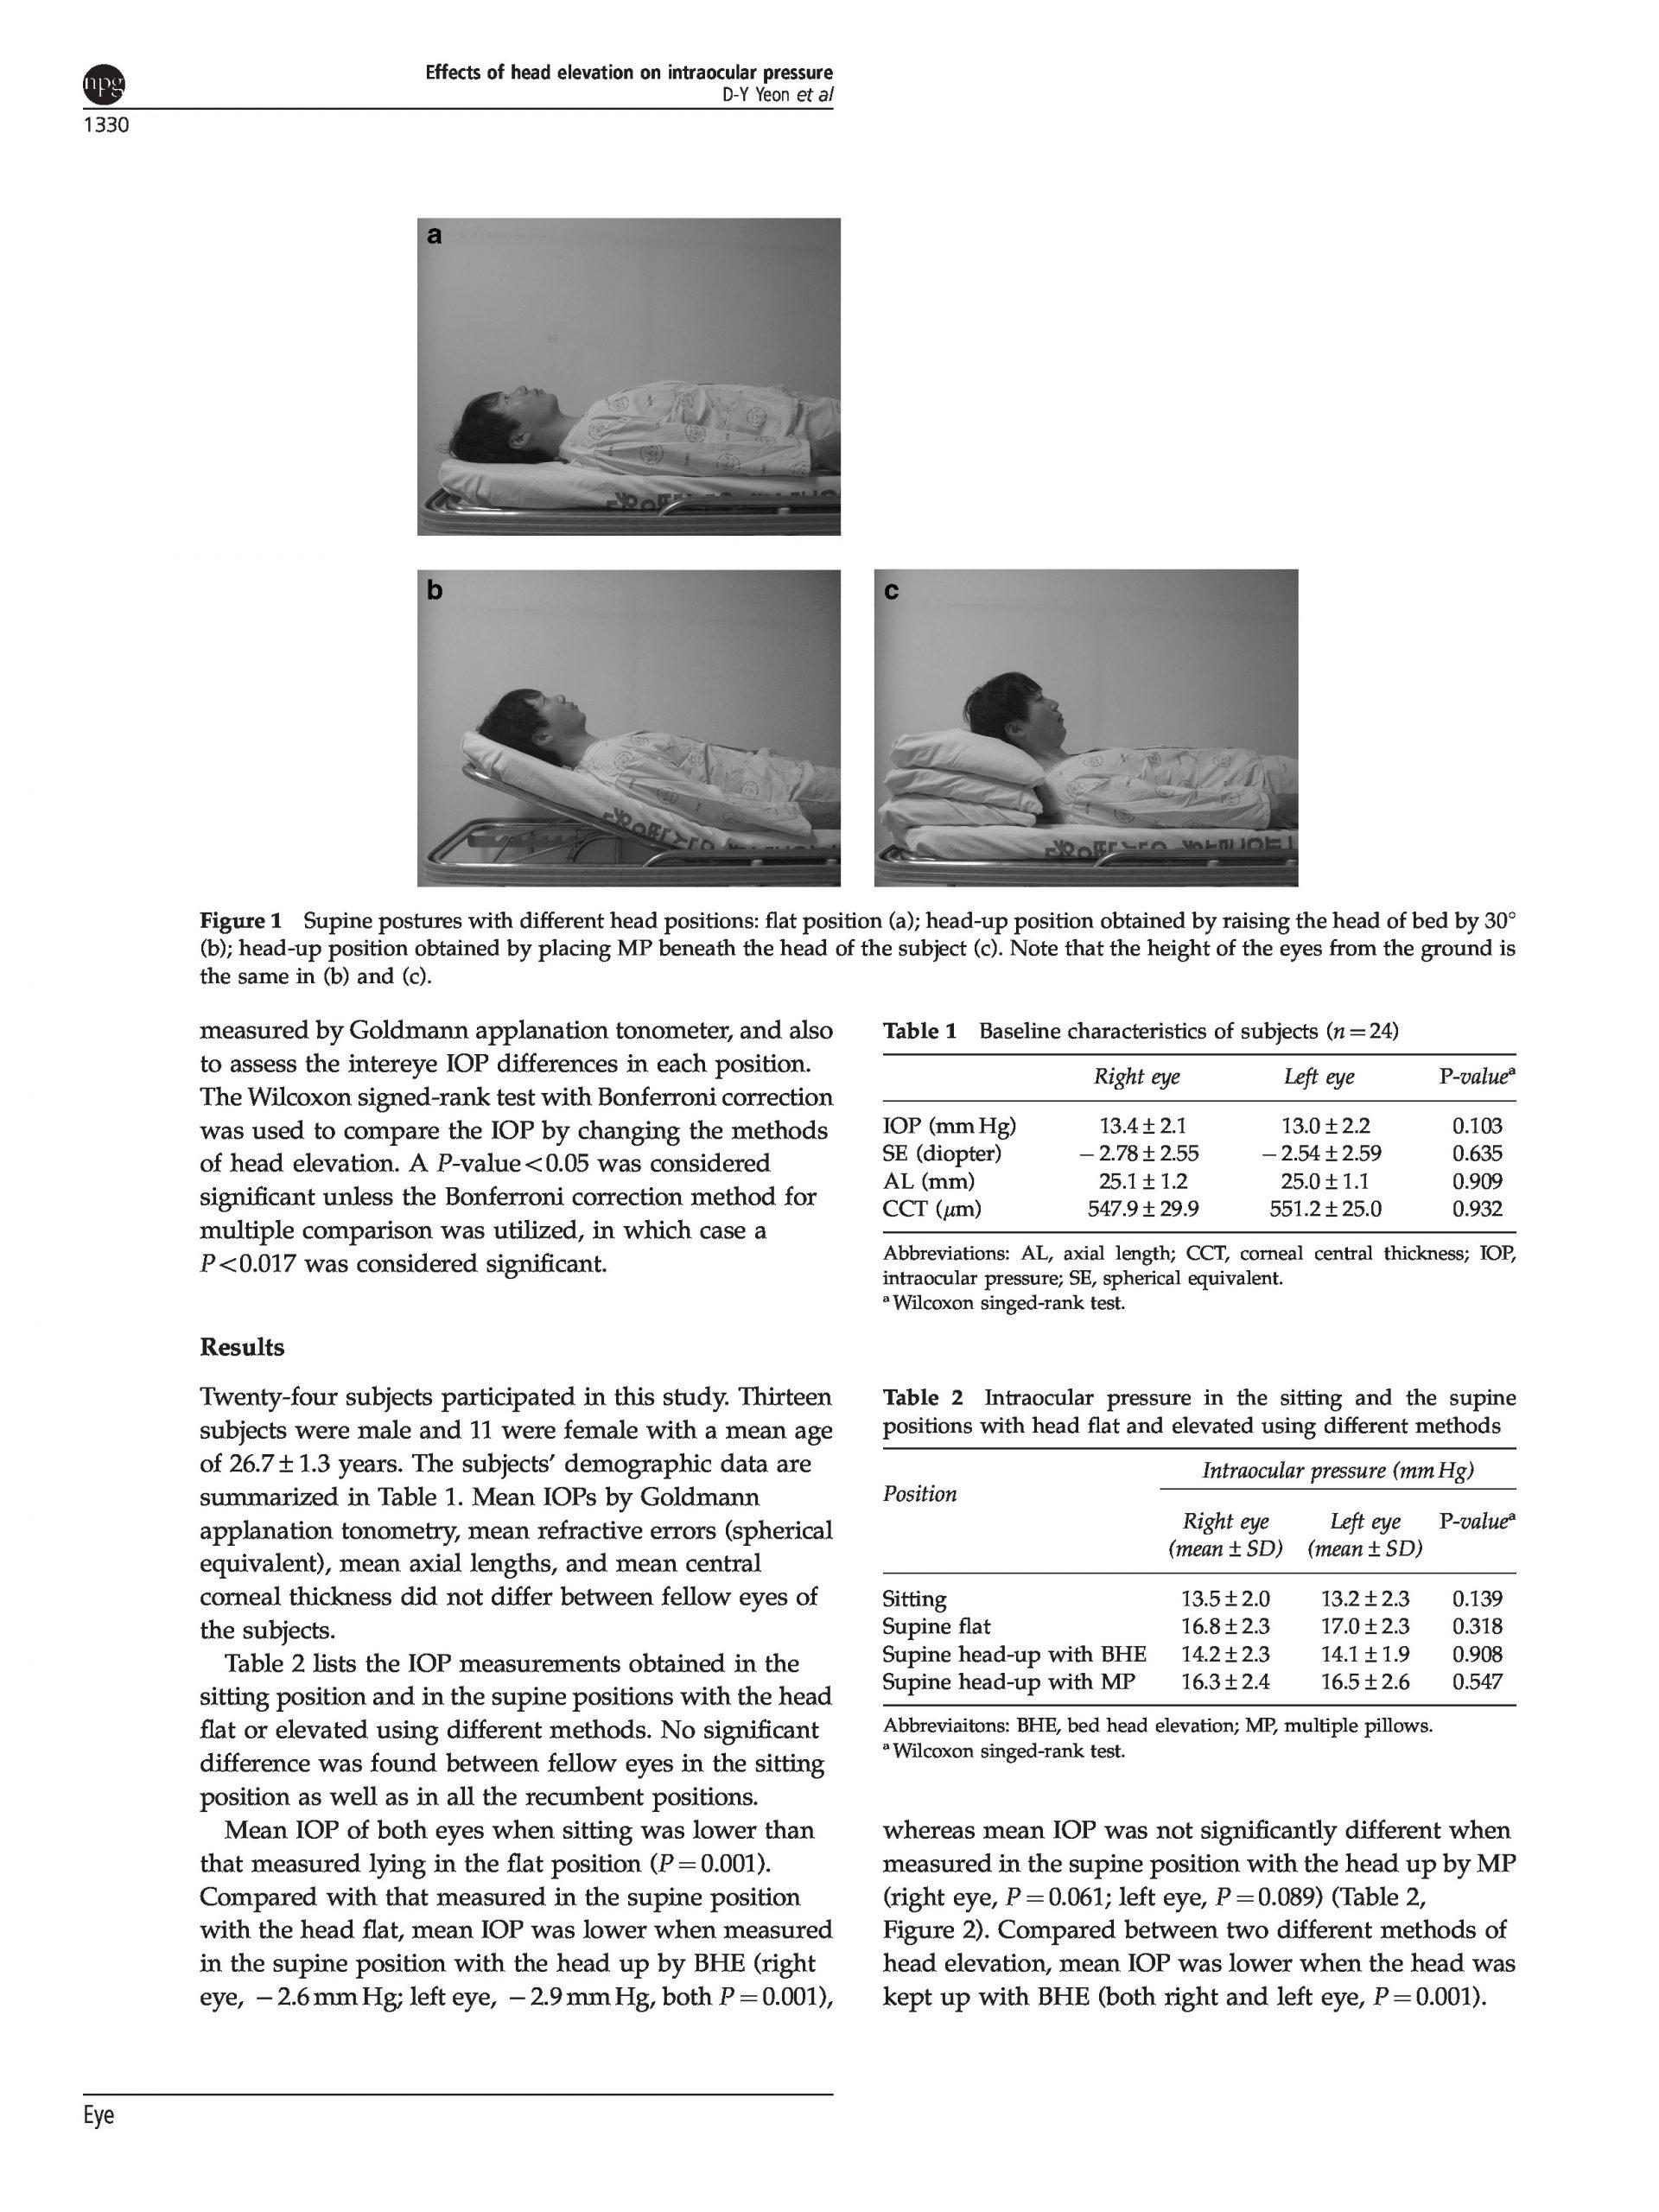 Effects of head elevation on intraocular pressure in healthy page 2 scaled